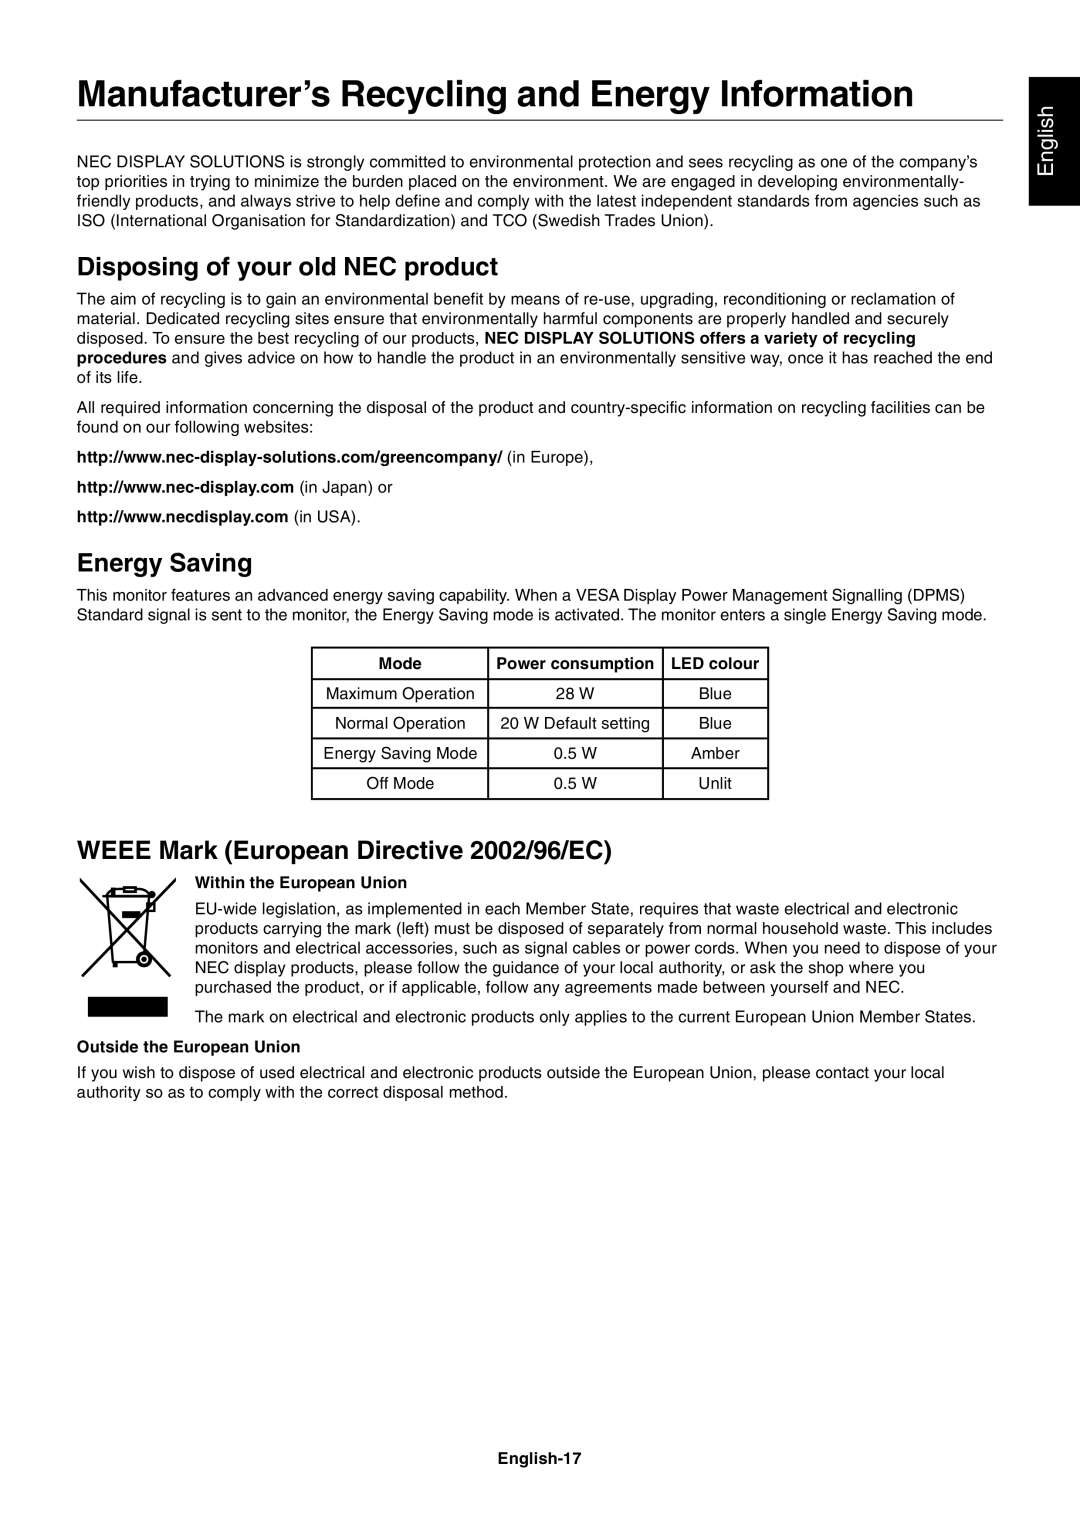 NEC L227HR Manufacturer’s Recycling and Energy Information, Disposing of your old NEC product, Energy Saving, English 